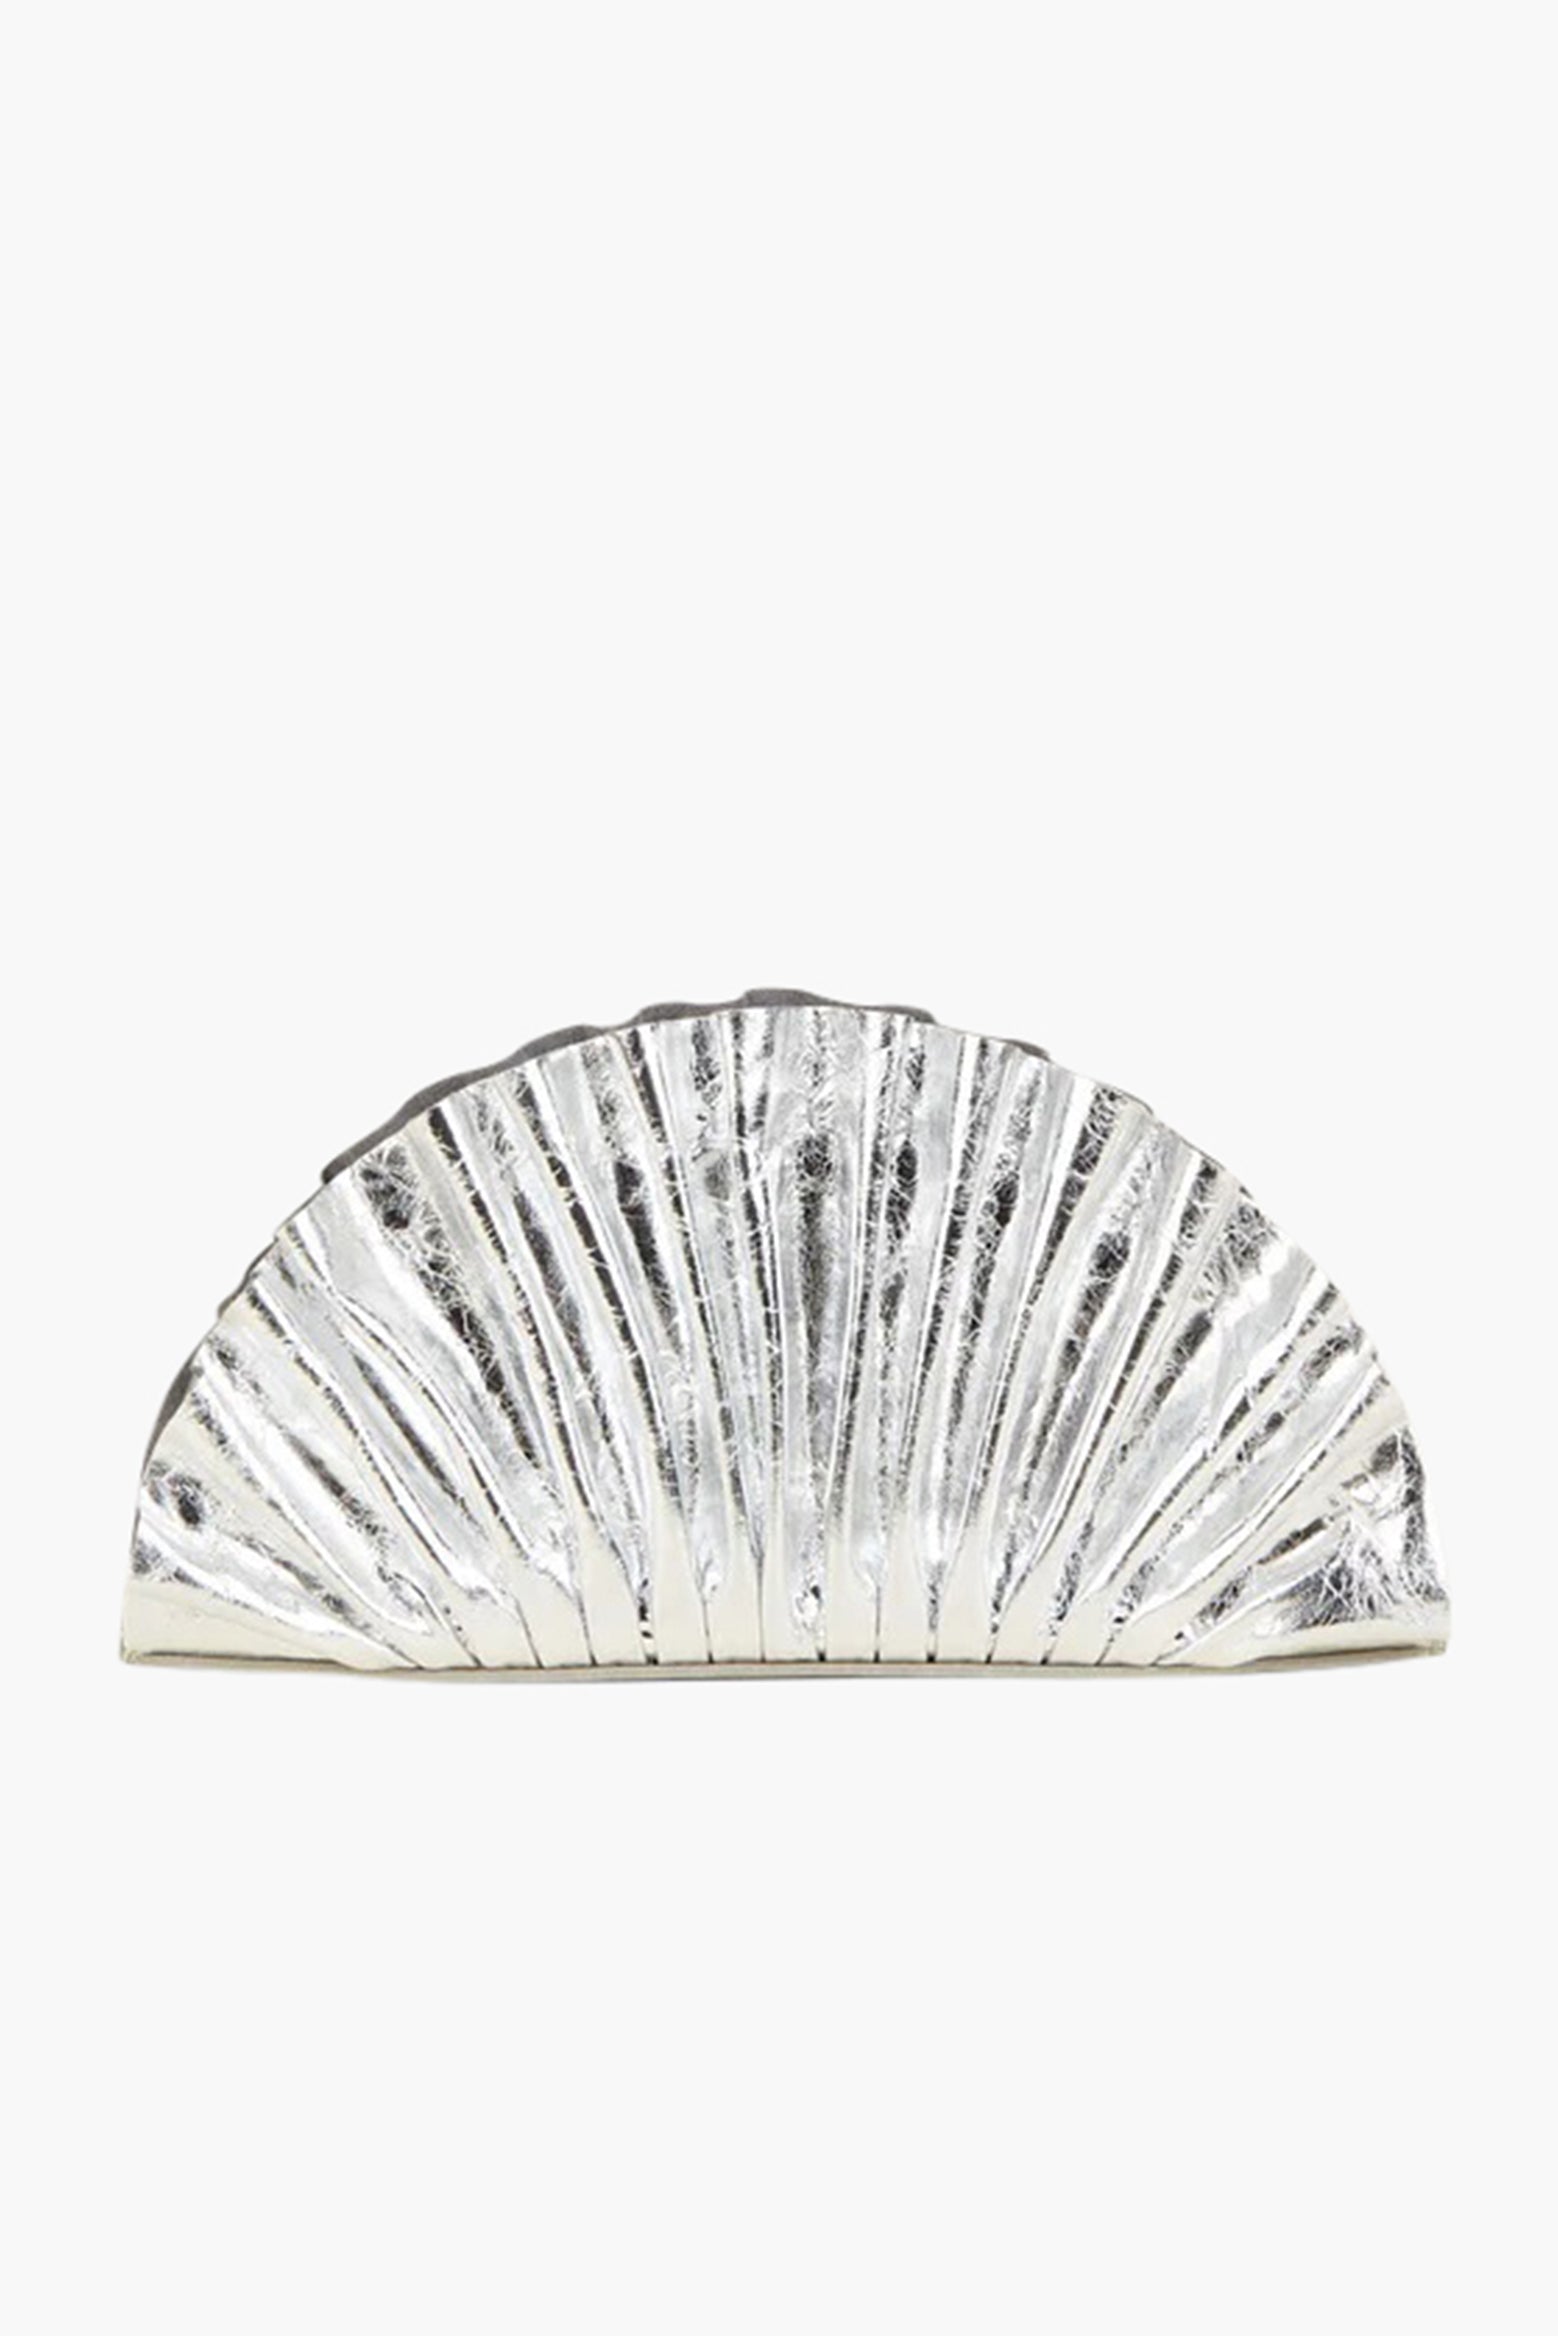 Cult Gaia Nala Mini Clutch in Silver available at The New Trend Australia.